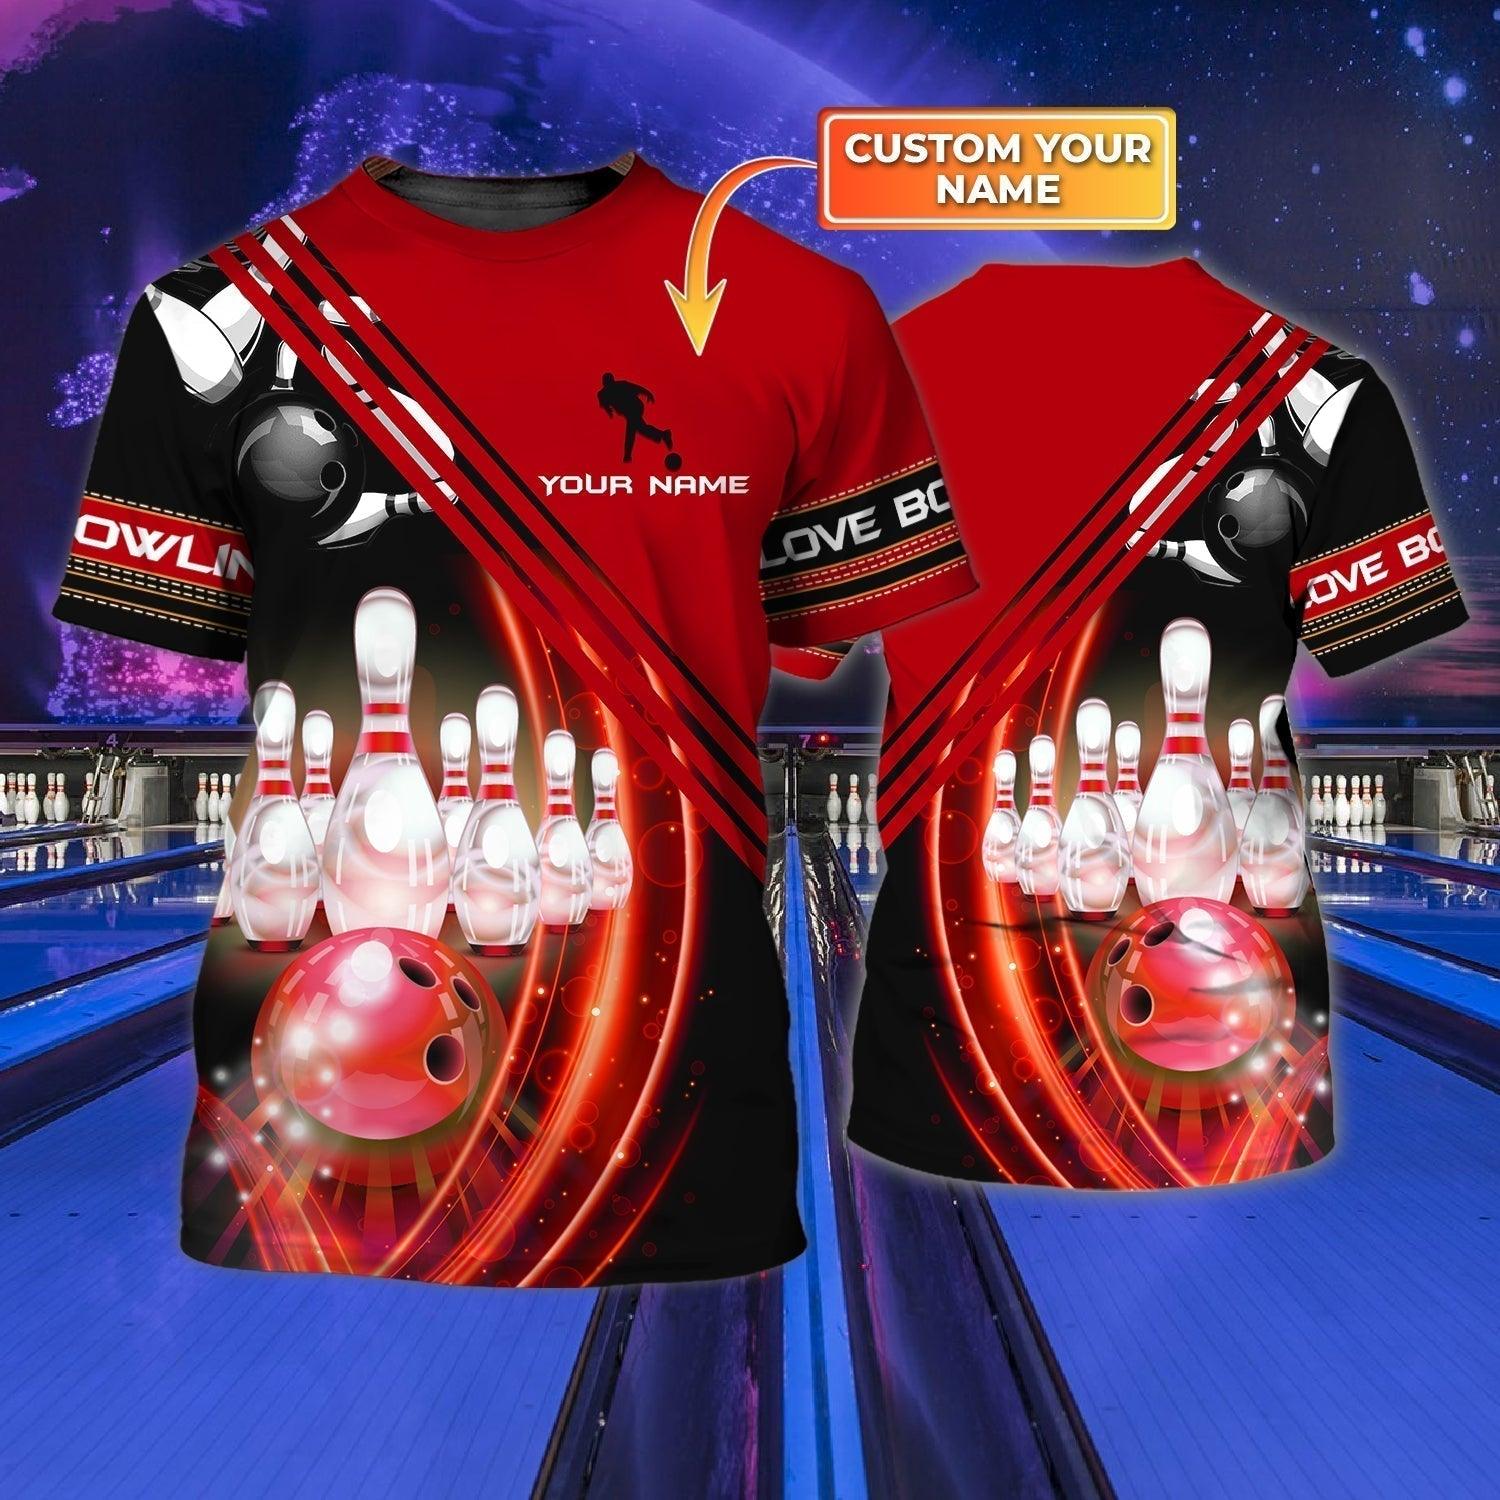 Customized Name Bowling Shirt, Personalized Name Red Bowling T Shirts, Custom Bowling Shirts For Men And Women - Perfect Gift For Bowling Lover - Amzanimalsgift